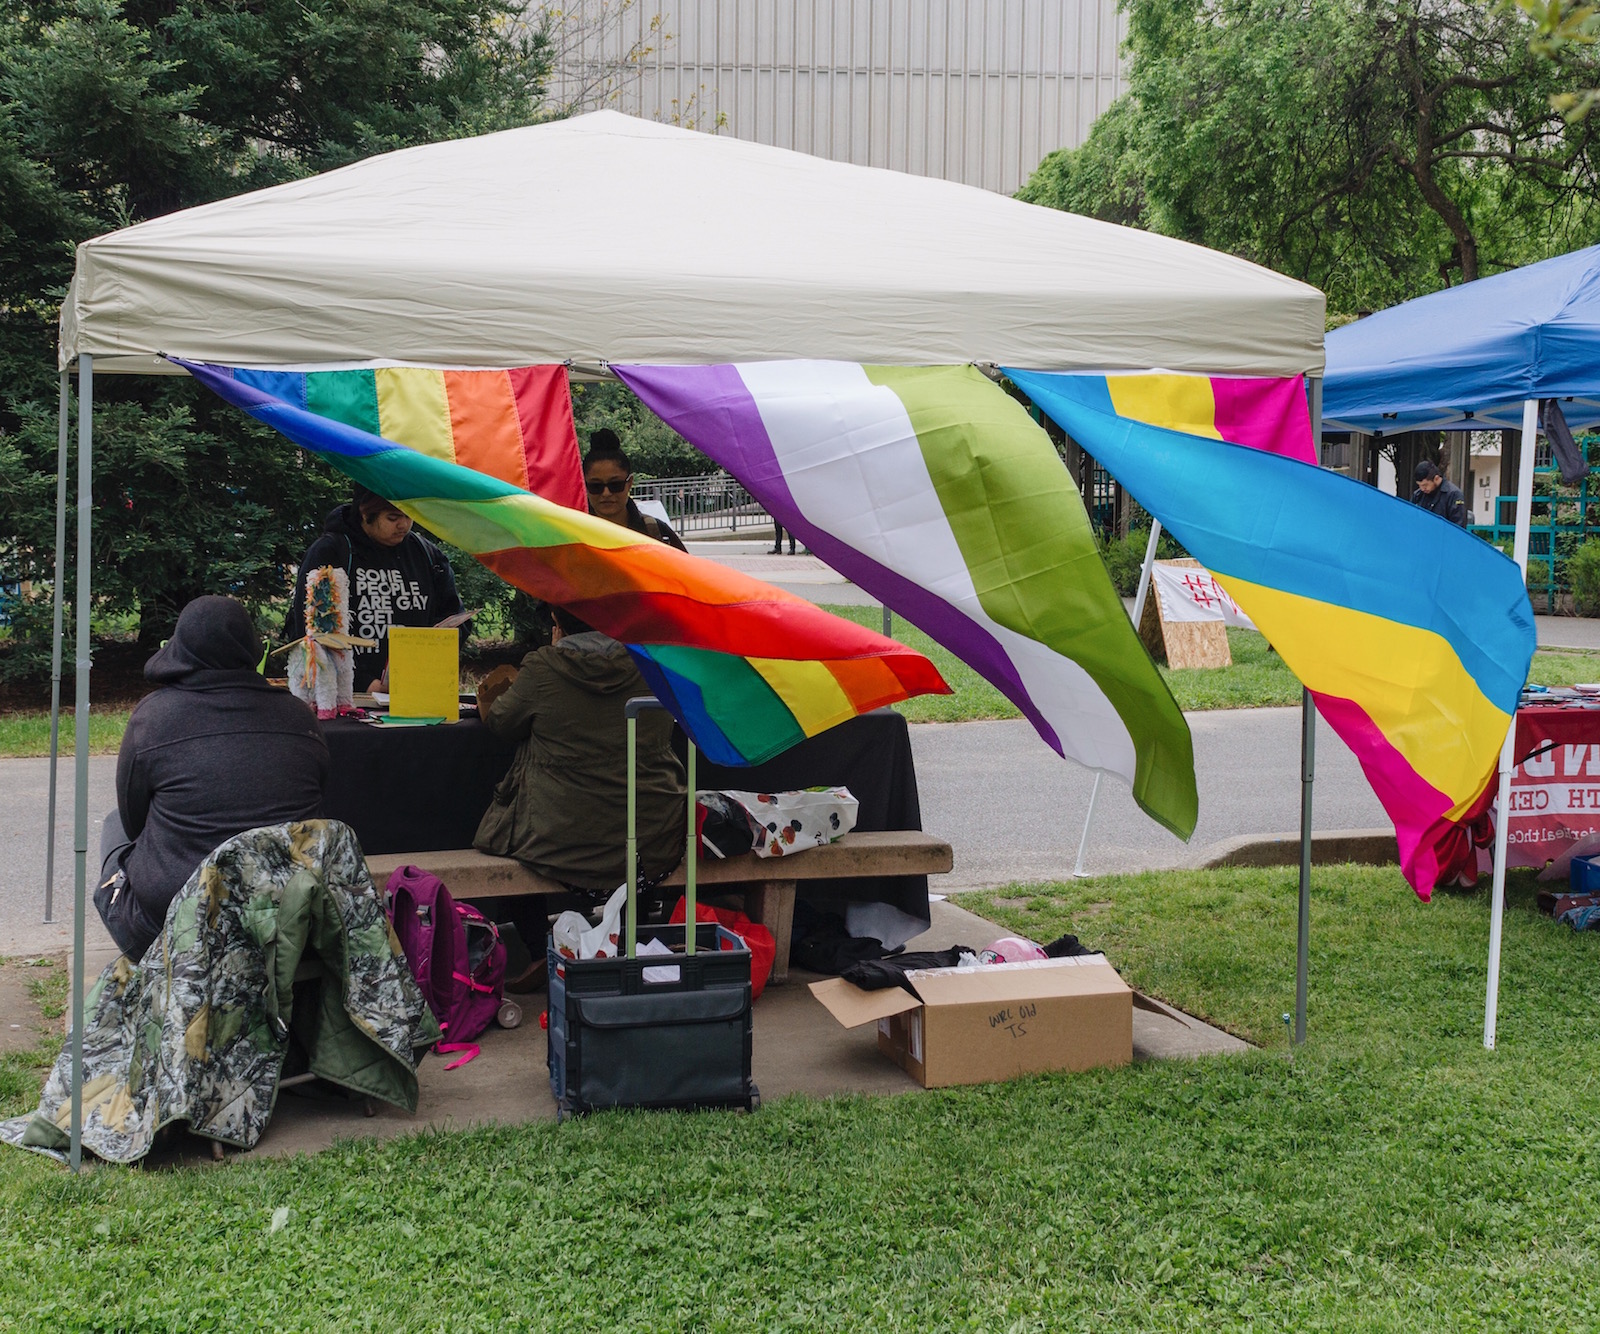 The PRIDE Center hosts many LGBT-related events on campus, such the Resource Fair on April 12. The center is currently celebrating its 10th academic year on the Sacramento State campus. (Photo by Matthew Nobert)